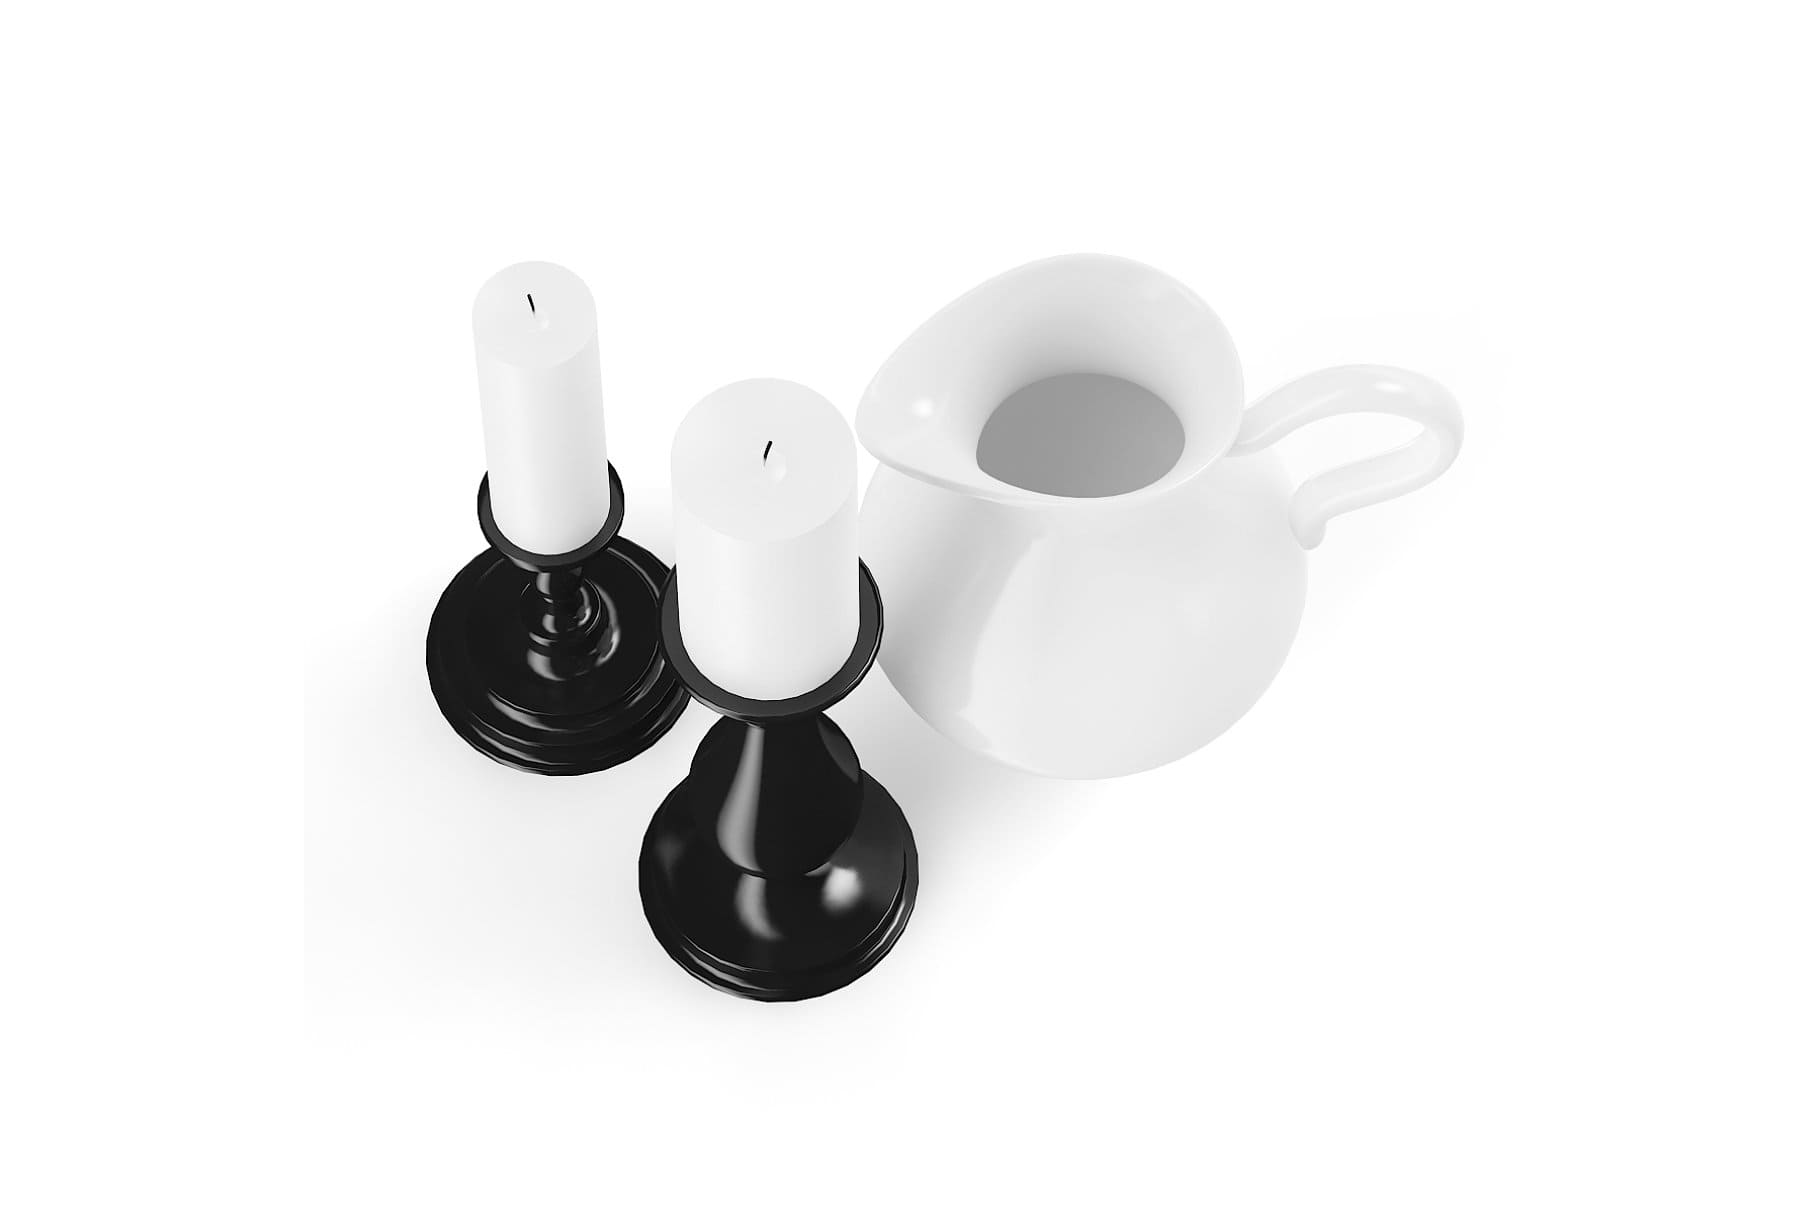 A white porcelain mug stands next to white candles.